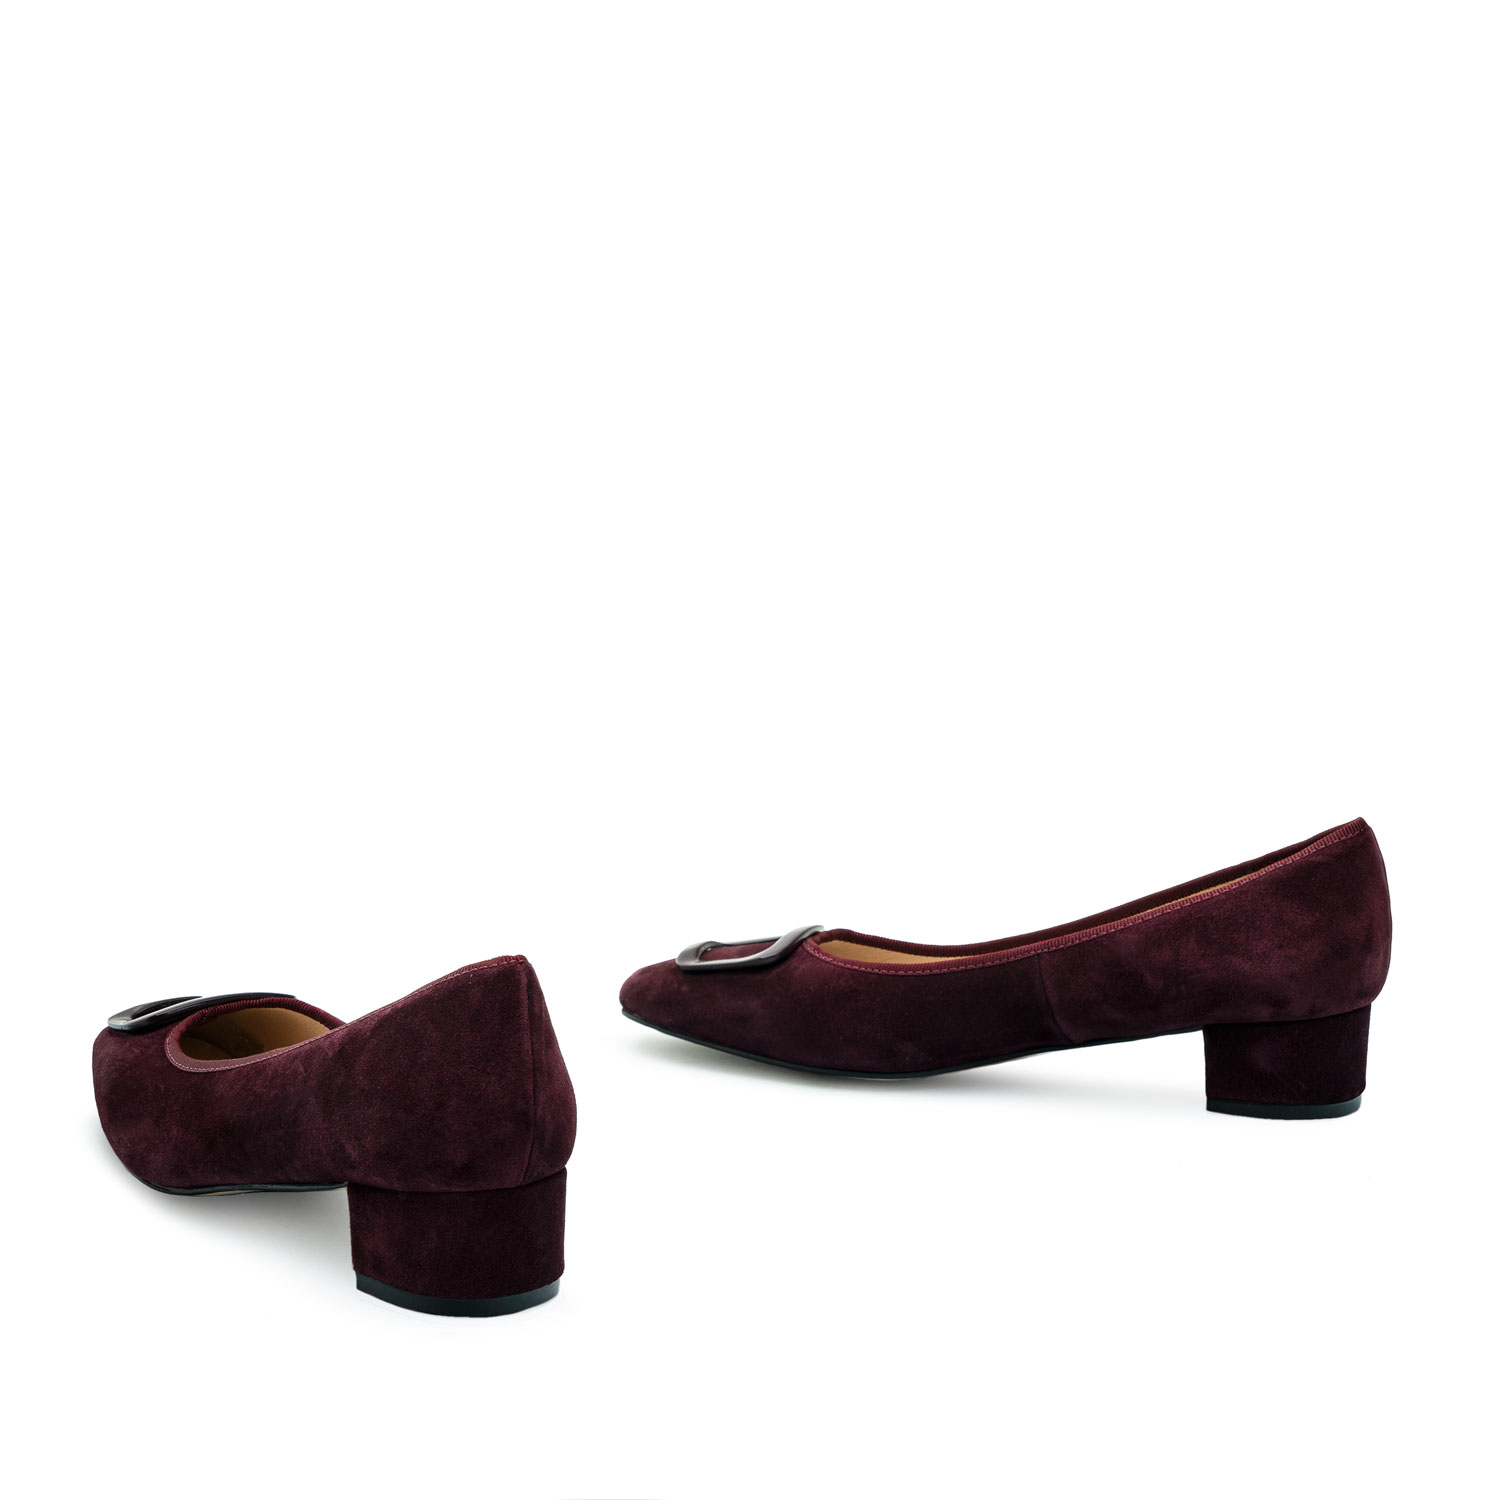 Heeled Shoes in Burgundy Split leather 